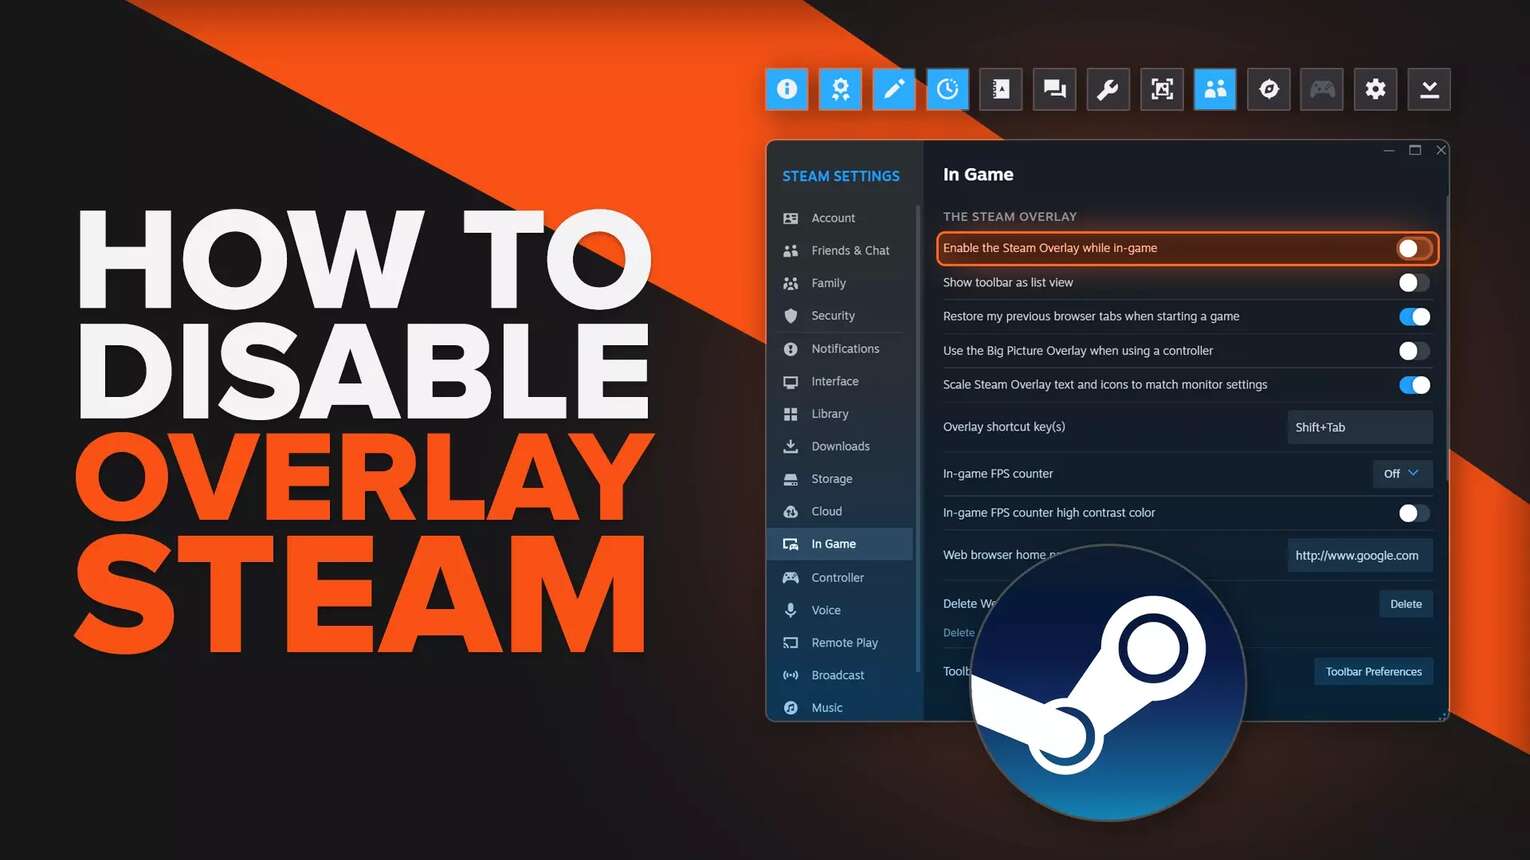 How to Quickly Disable the Steam Overlay [Complete Guide]